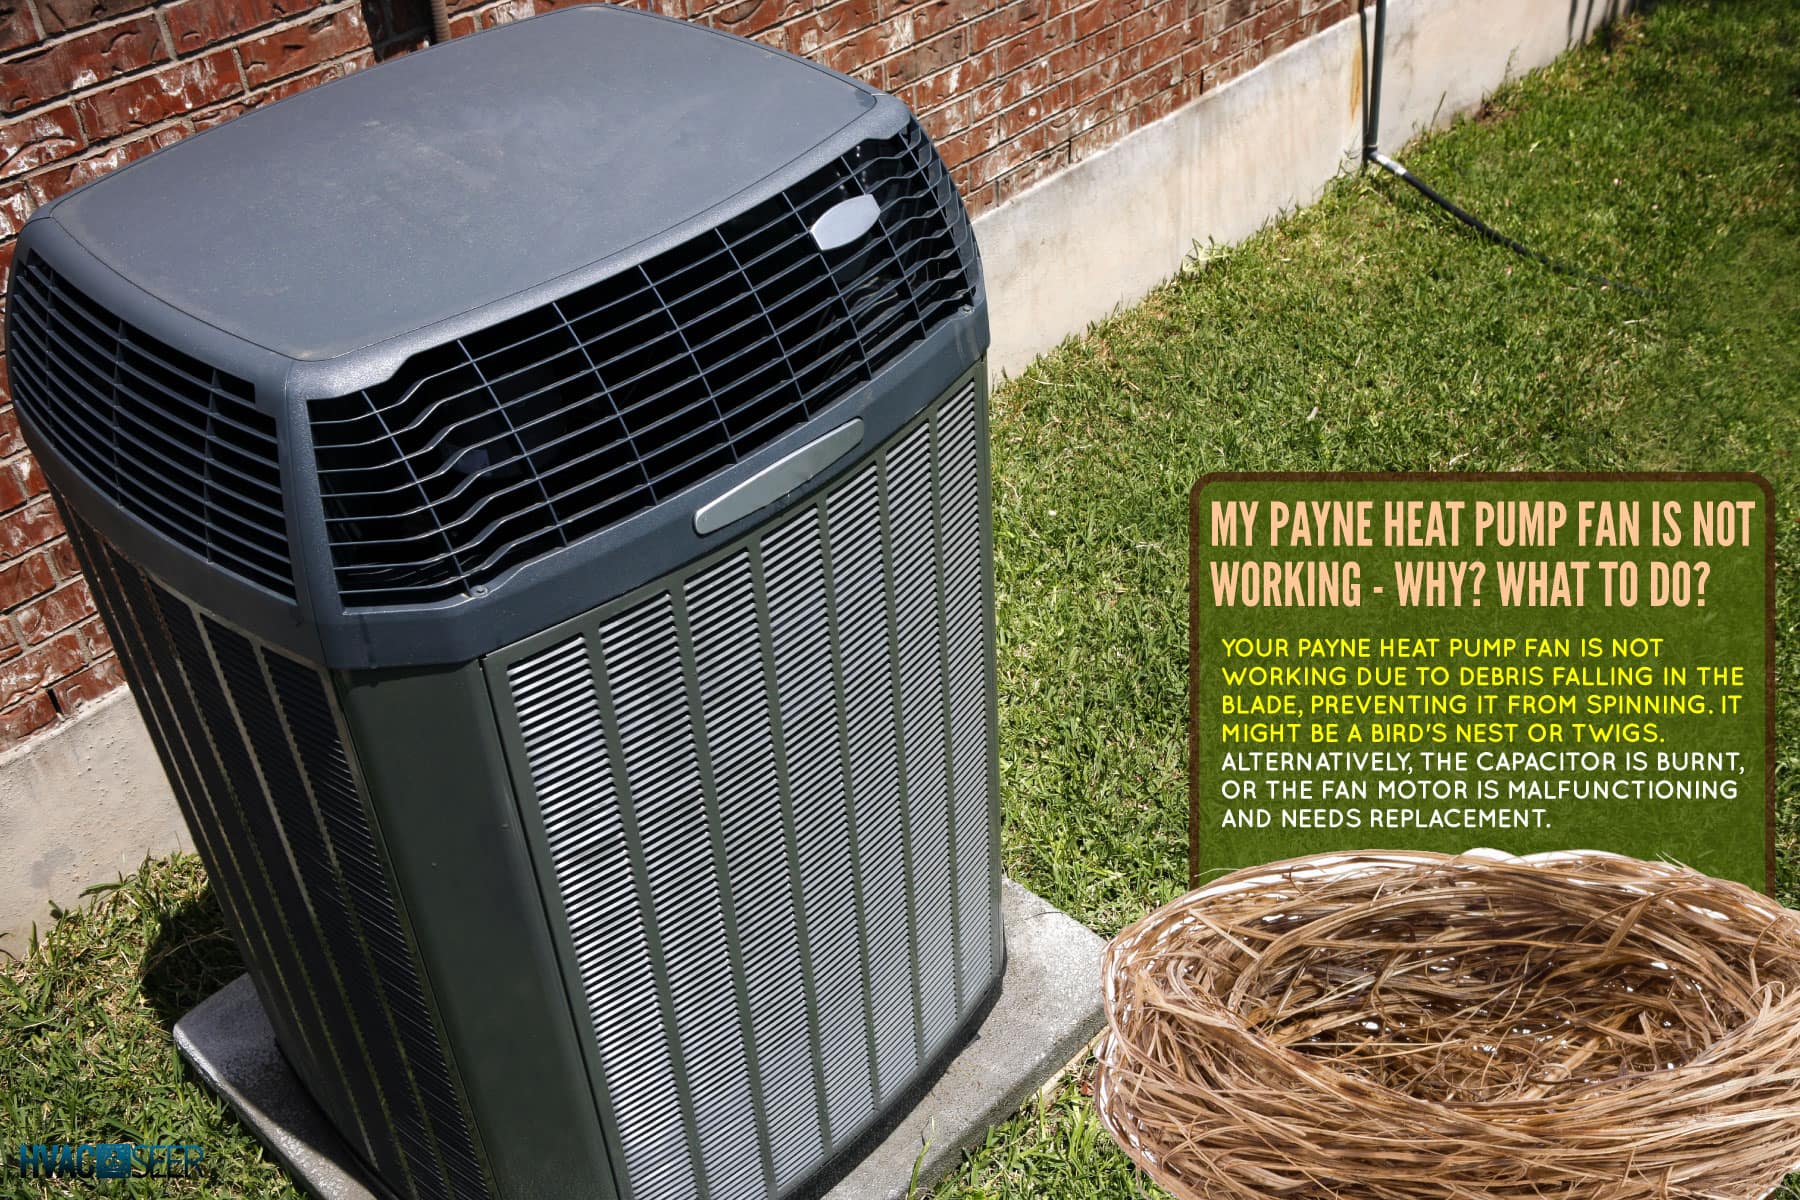 high-efficiency-modern-acheater-unit-energy-outdoor, My Payne Heat Pump Fan Is Not Working - Why? What To Do?